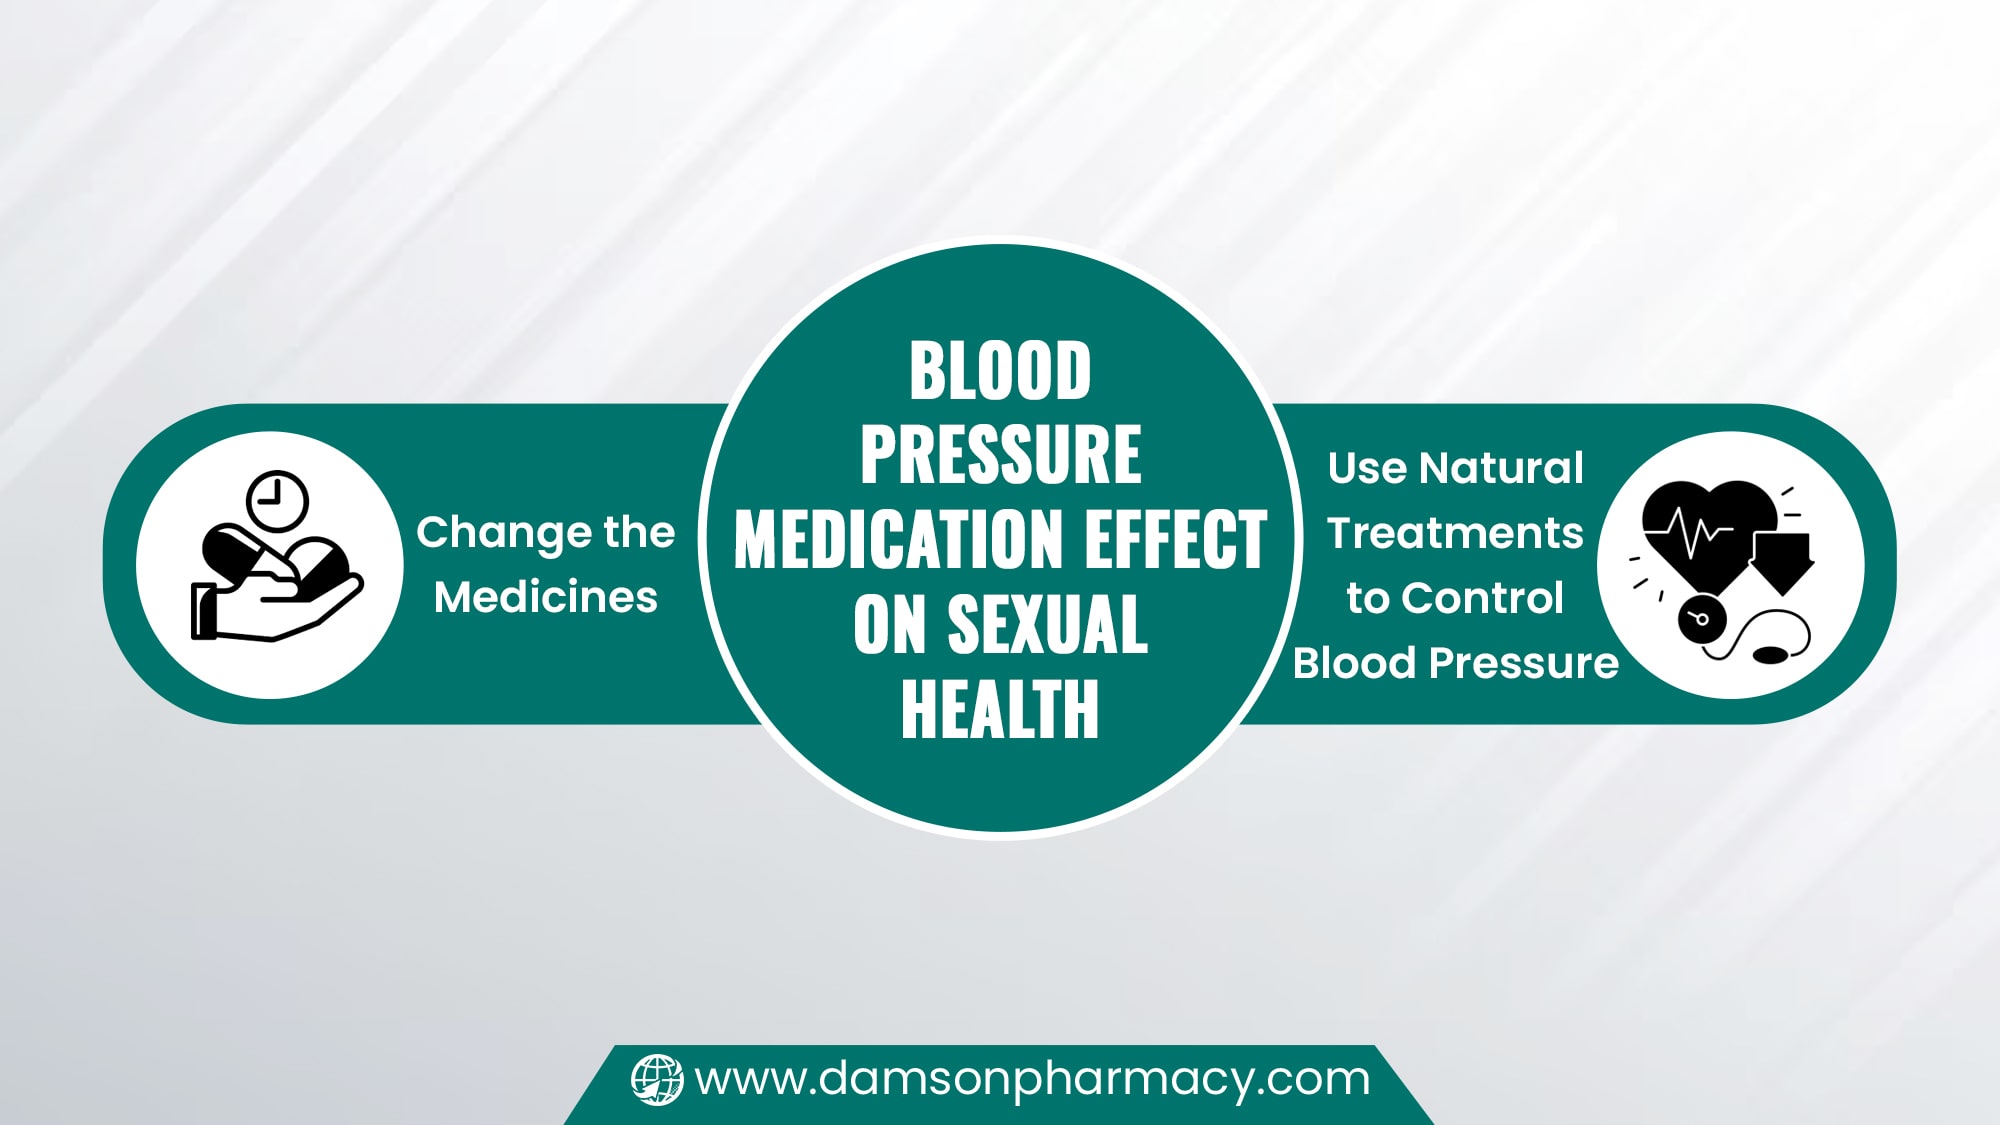 Blood Pressure Medication Effect on Sexual Health